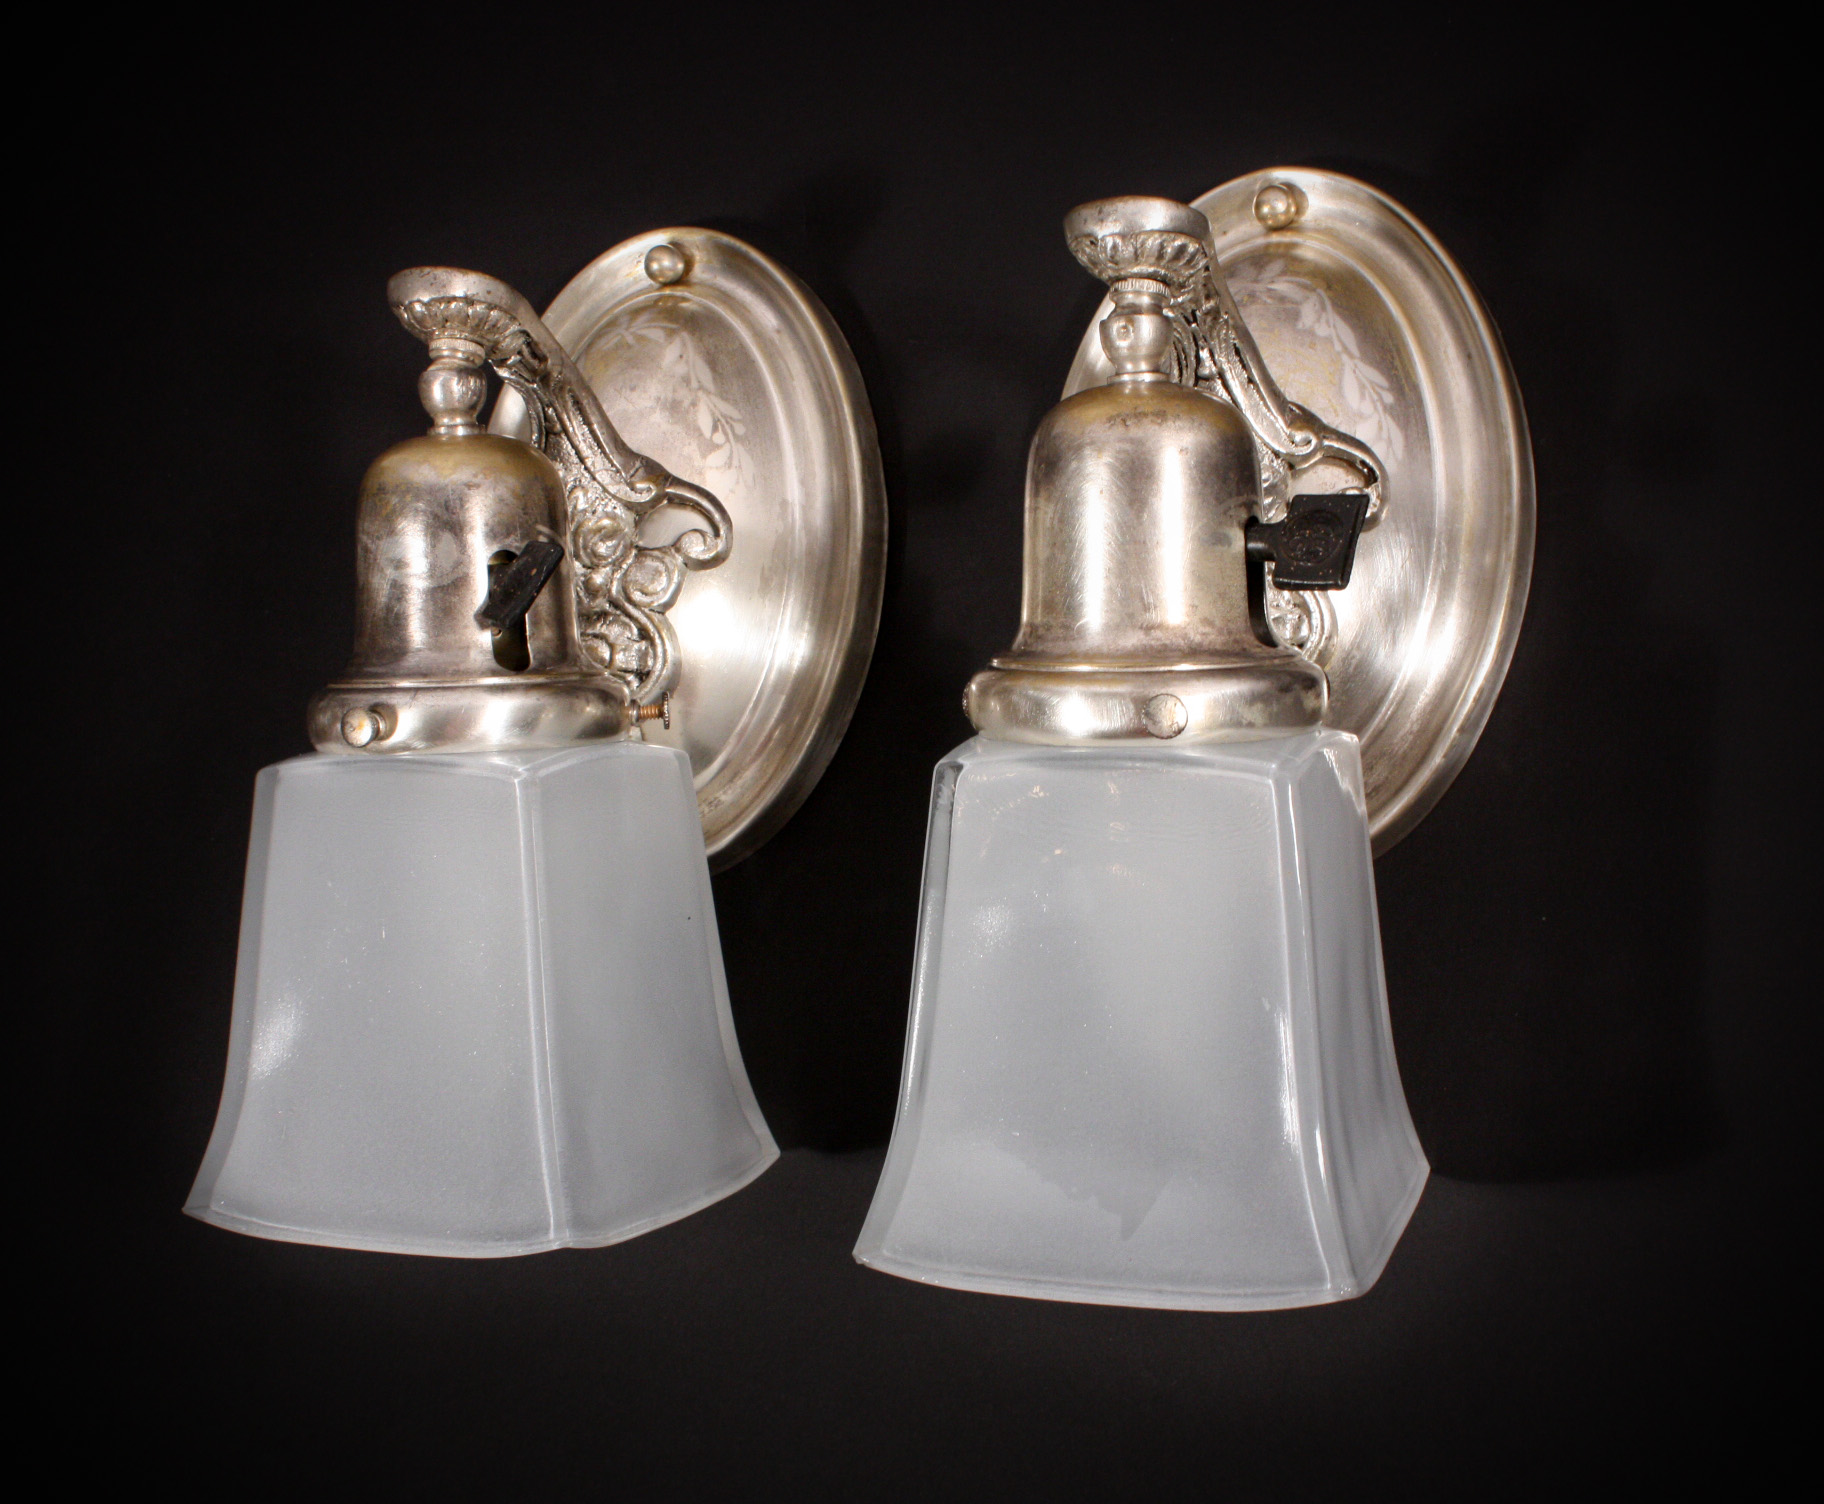 SOLD Beautiful Pair of Antique Single-Arm Sconces, Silver Plate, c. 1910-18680